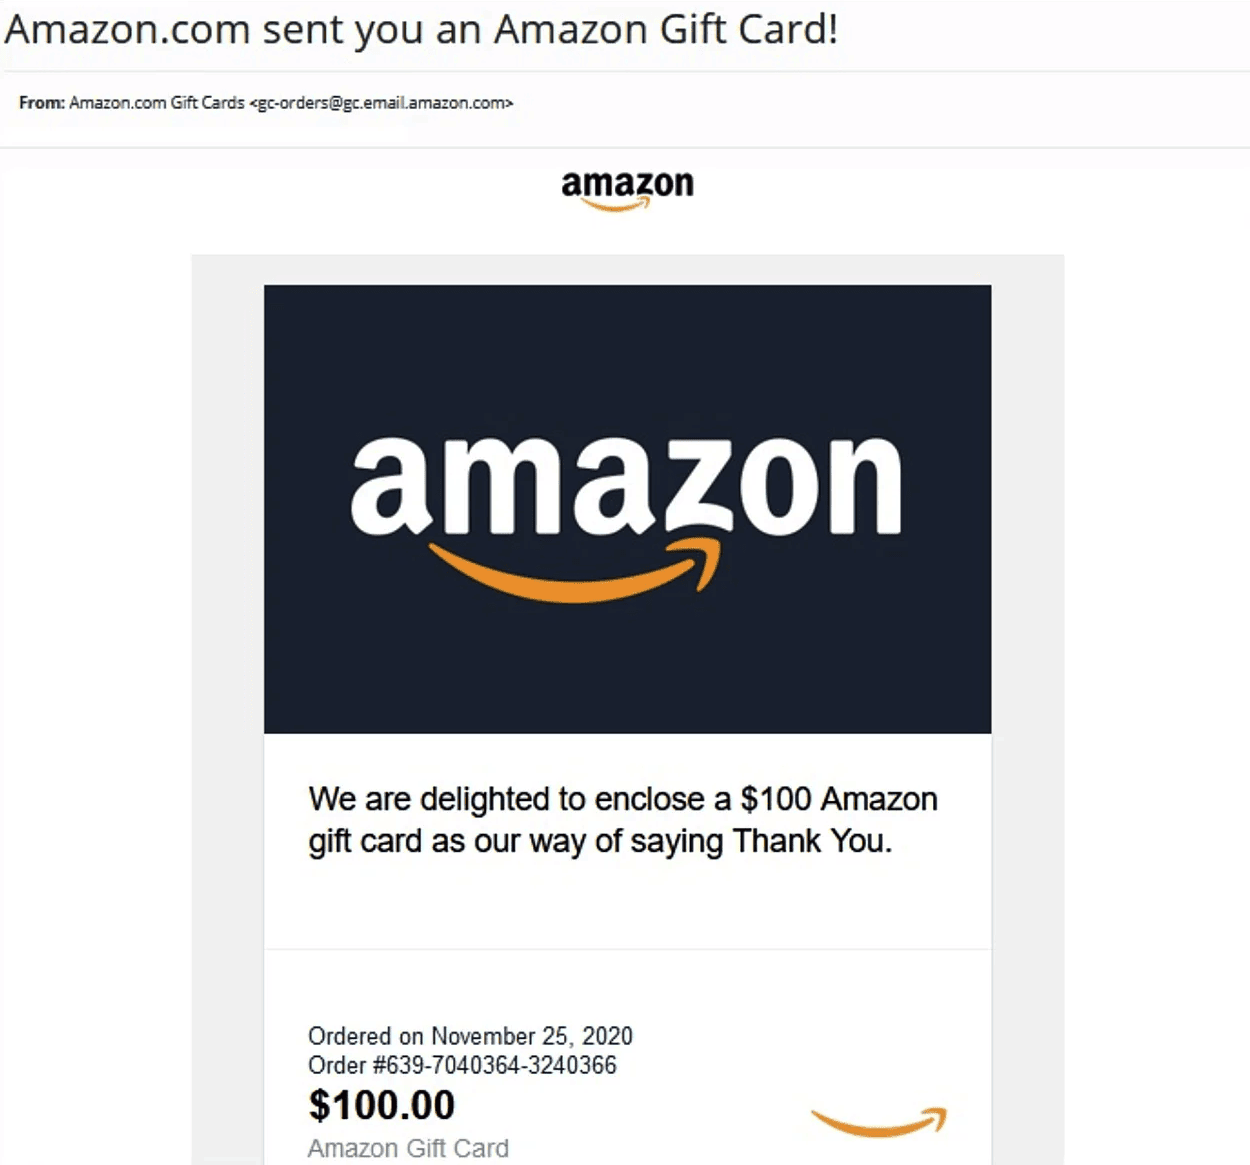 6 Easy Ways to Get Free Amazon Gift Cards (Up to $)